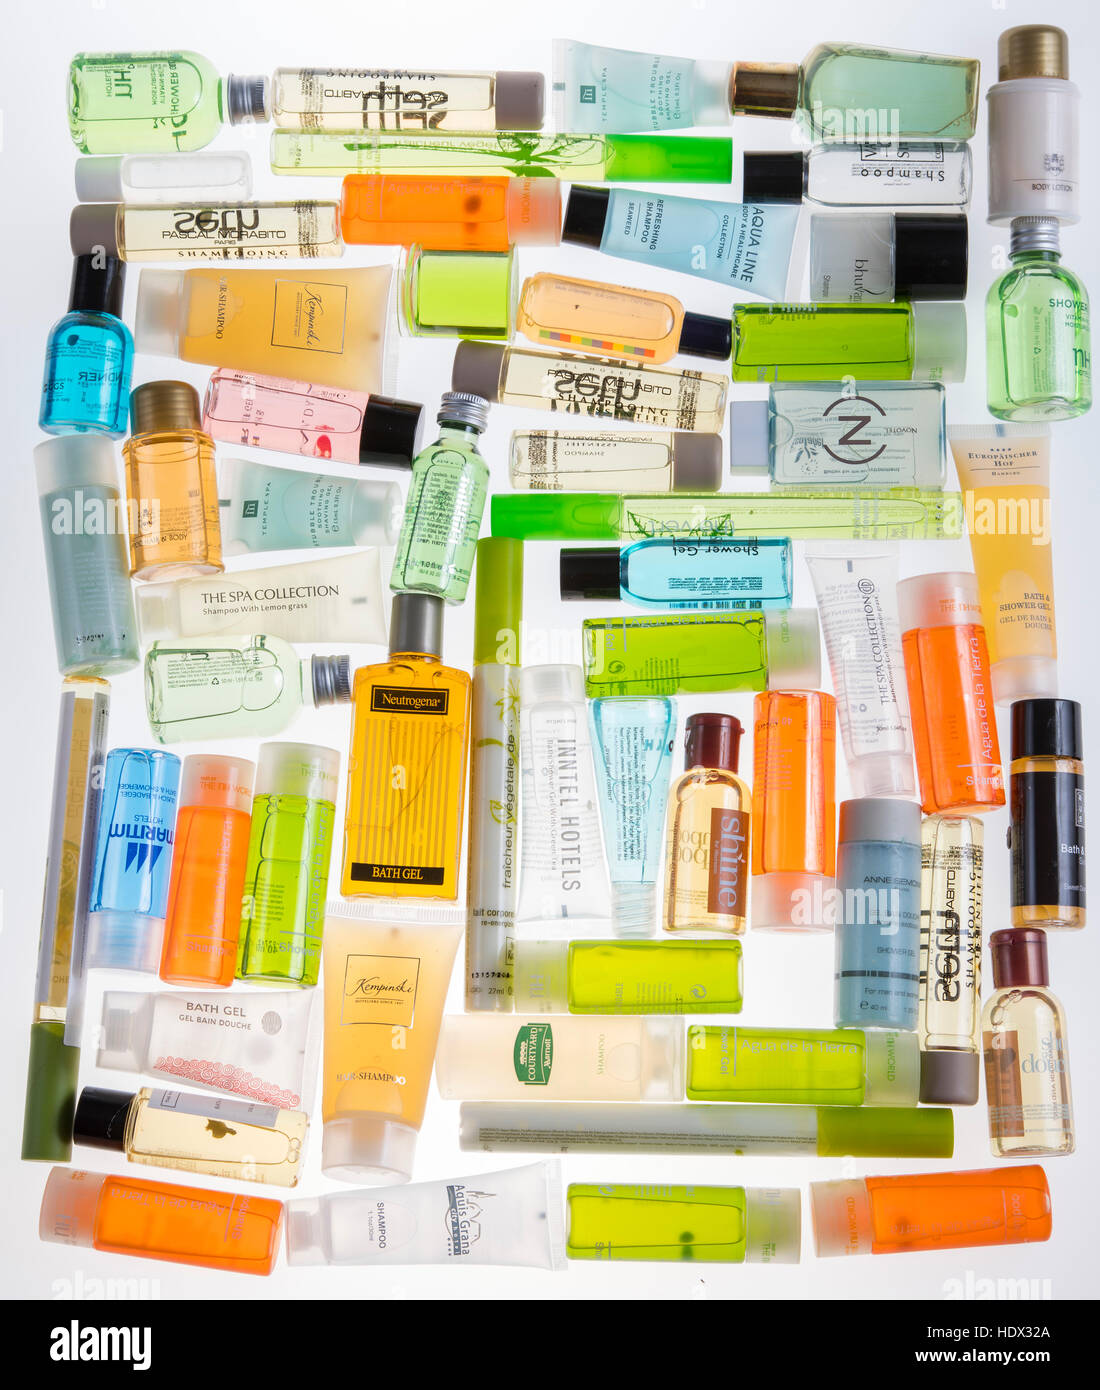 Many different body care products, perfumes, shower gels, bath gels, hair shampoos, body lotions, sample packs, hotel amenities, bottlings, Stock Photo